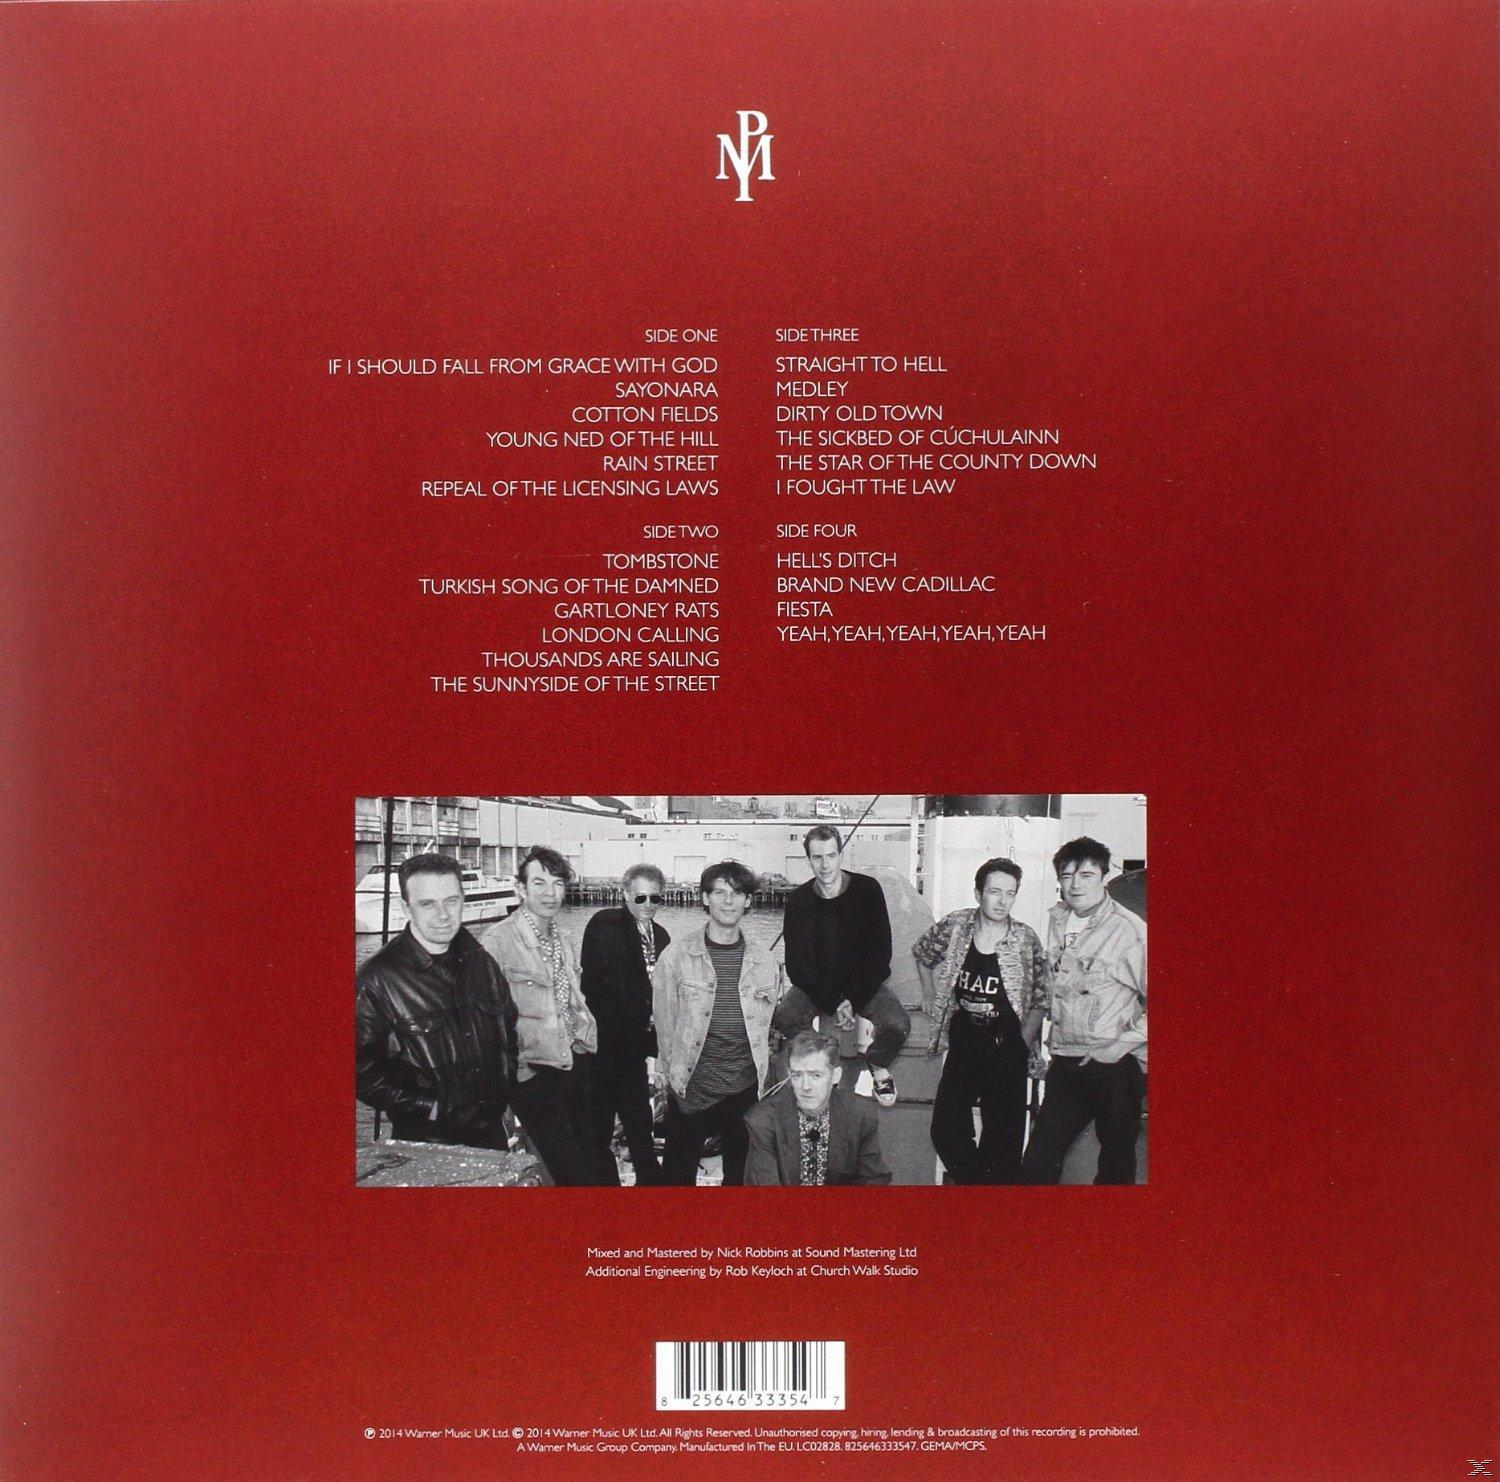 The Pogues 1991 - (Vinyl) Strummer With Joe London Live - In Pogues The